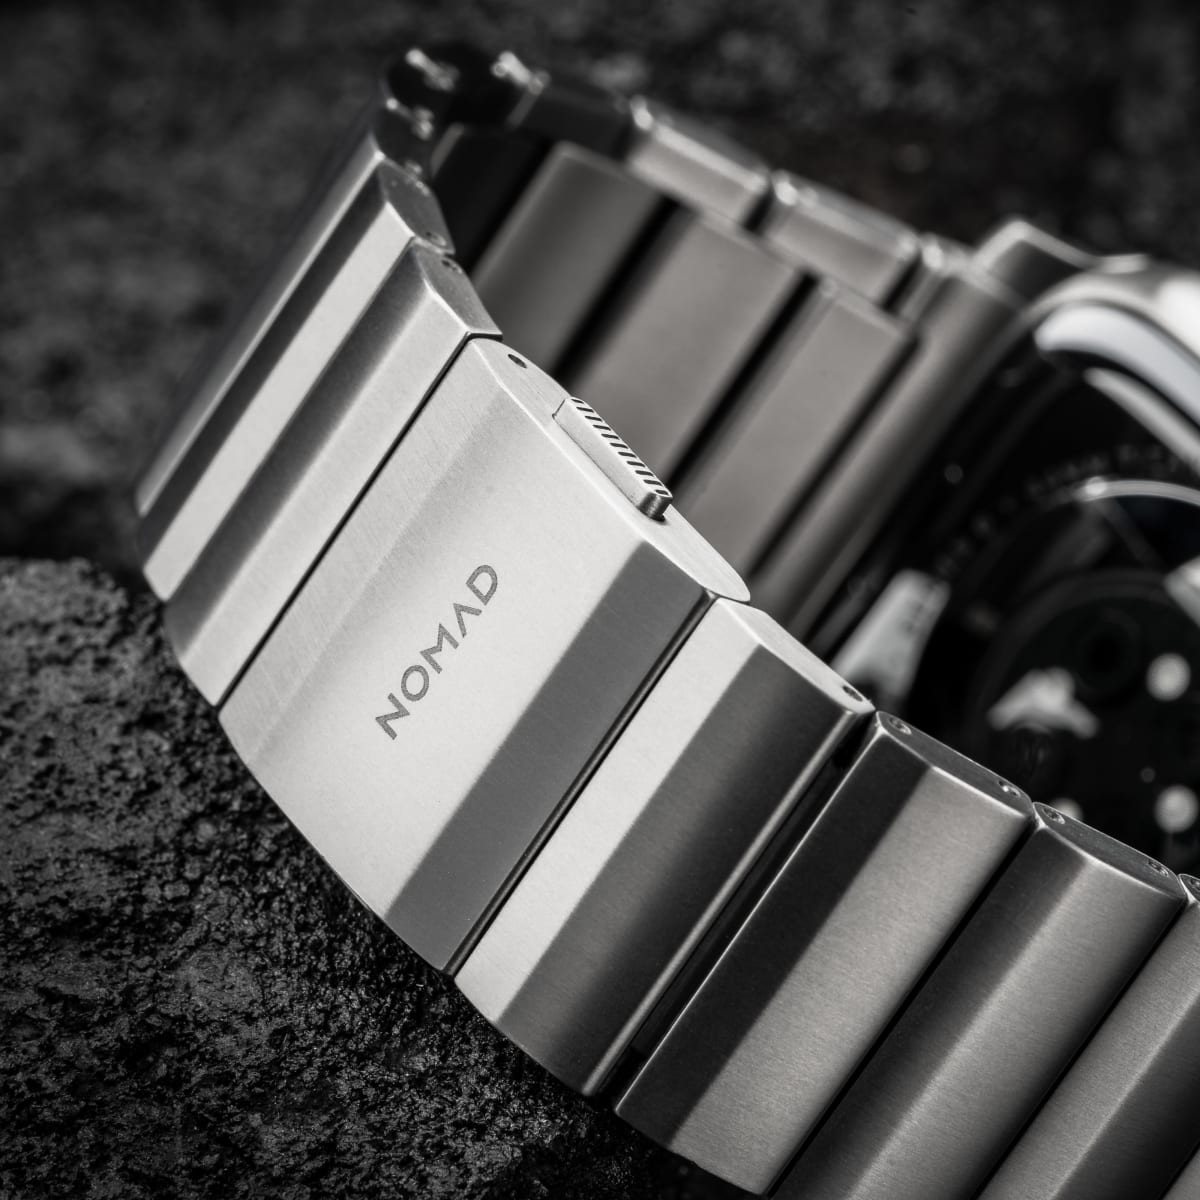 Nomad launches its updated collection of metal Apple Watch bands